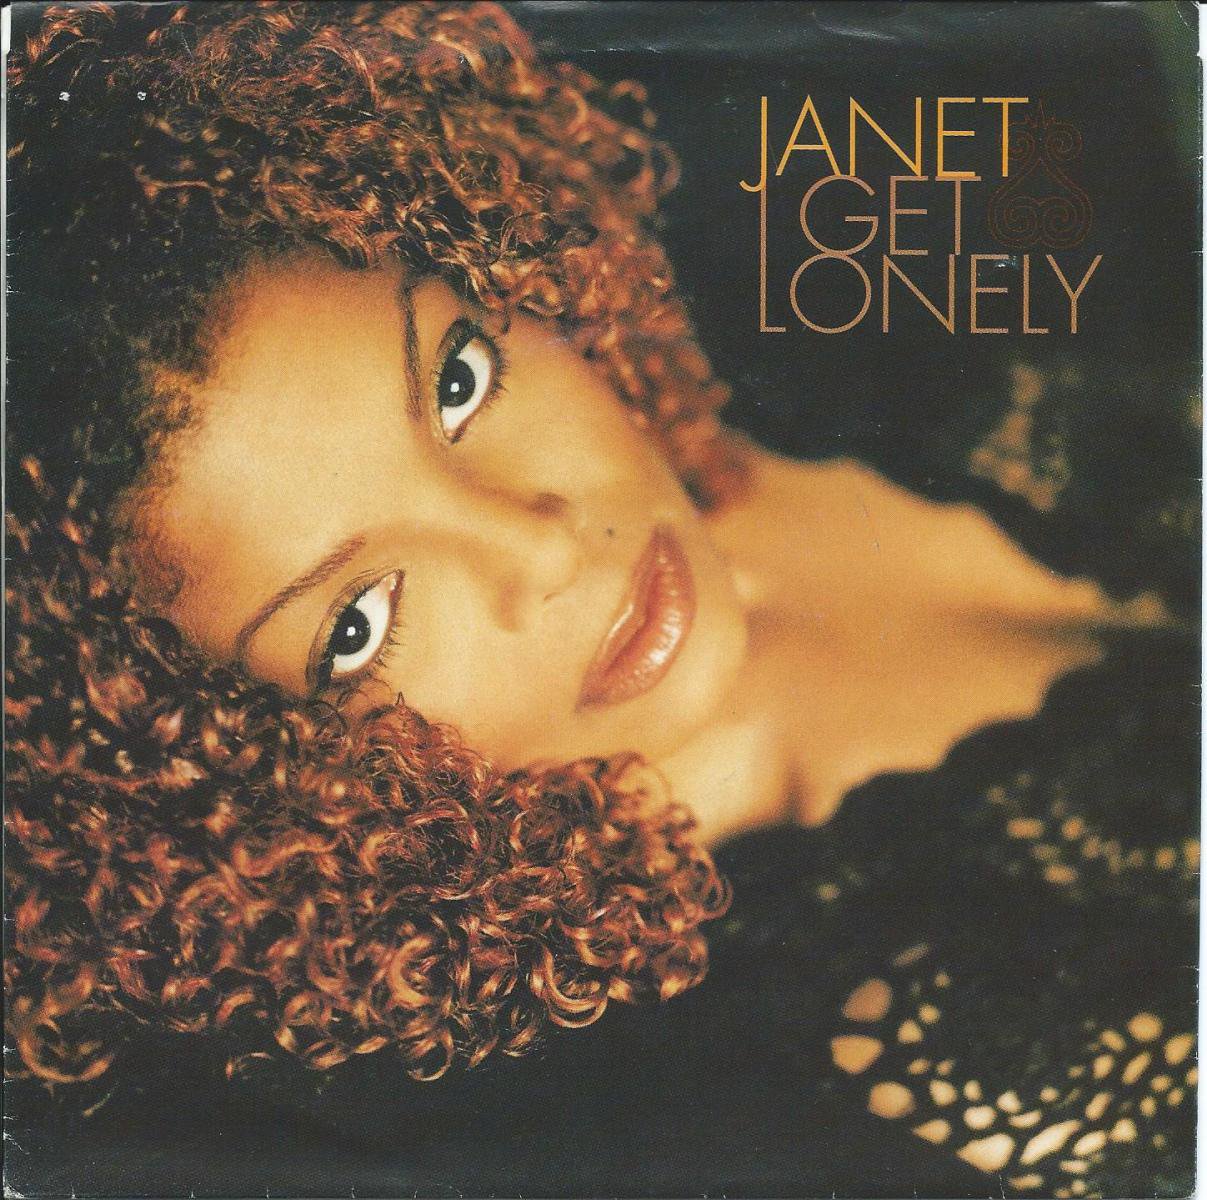 JANET JACKSON / I GET LONELY (7